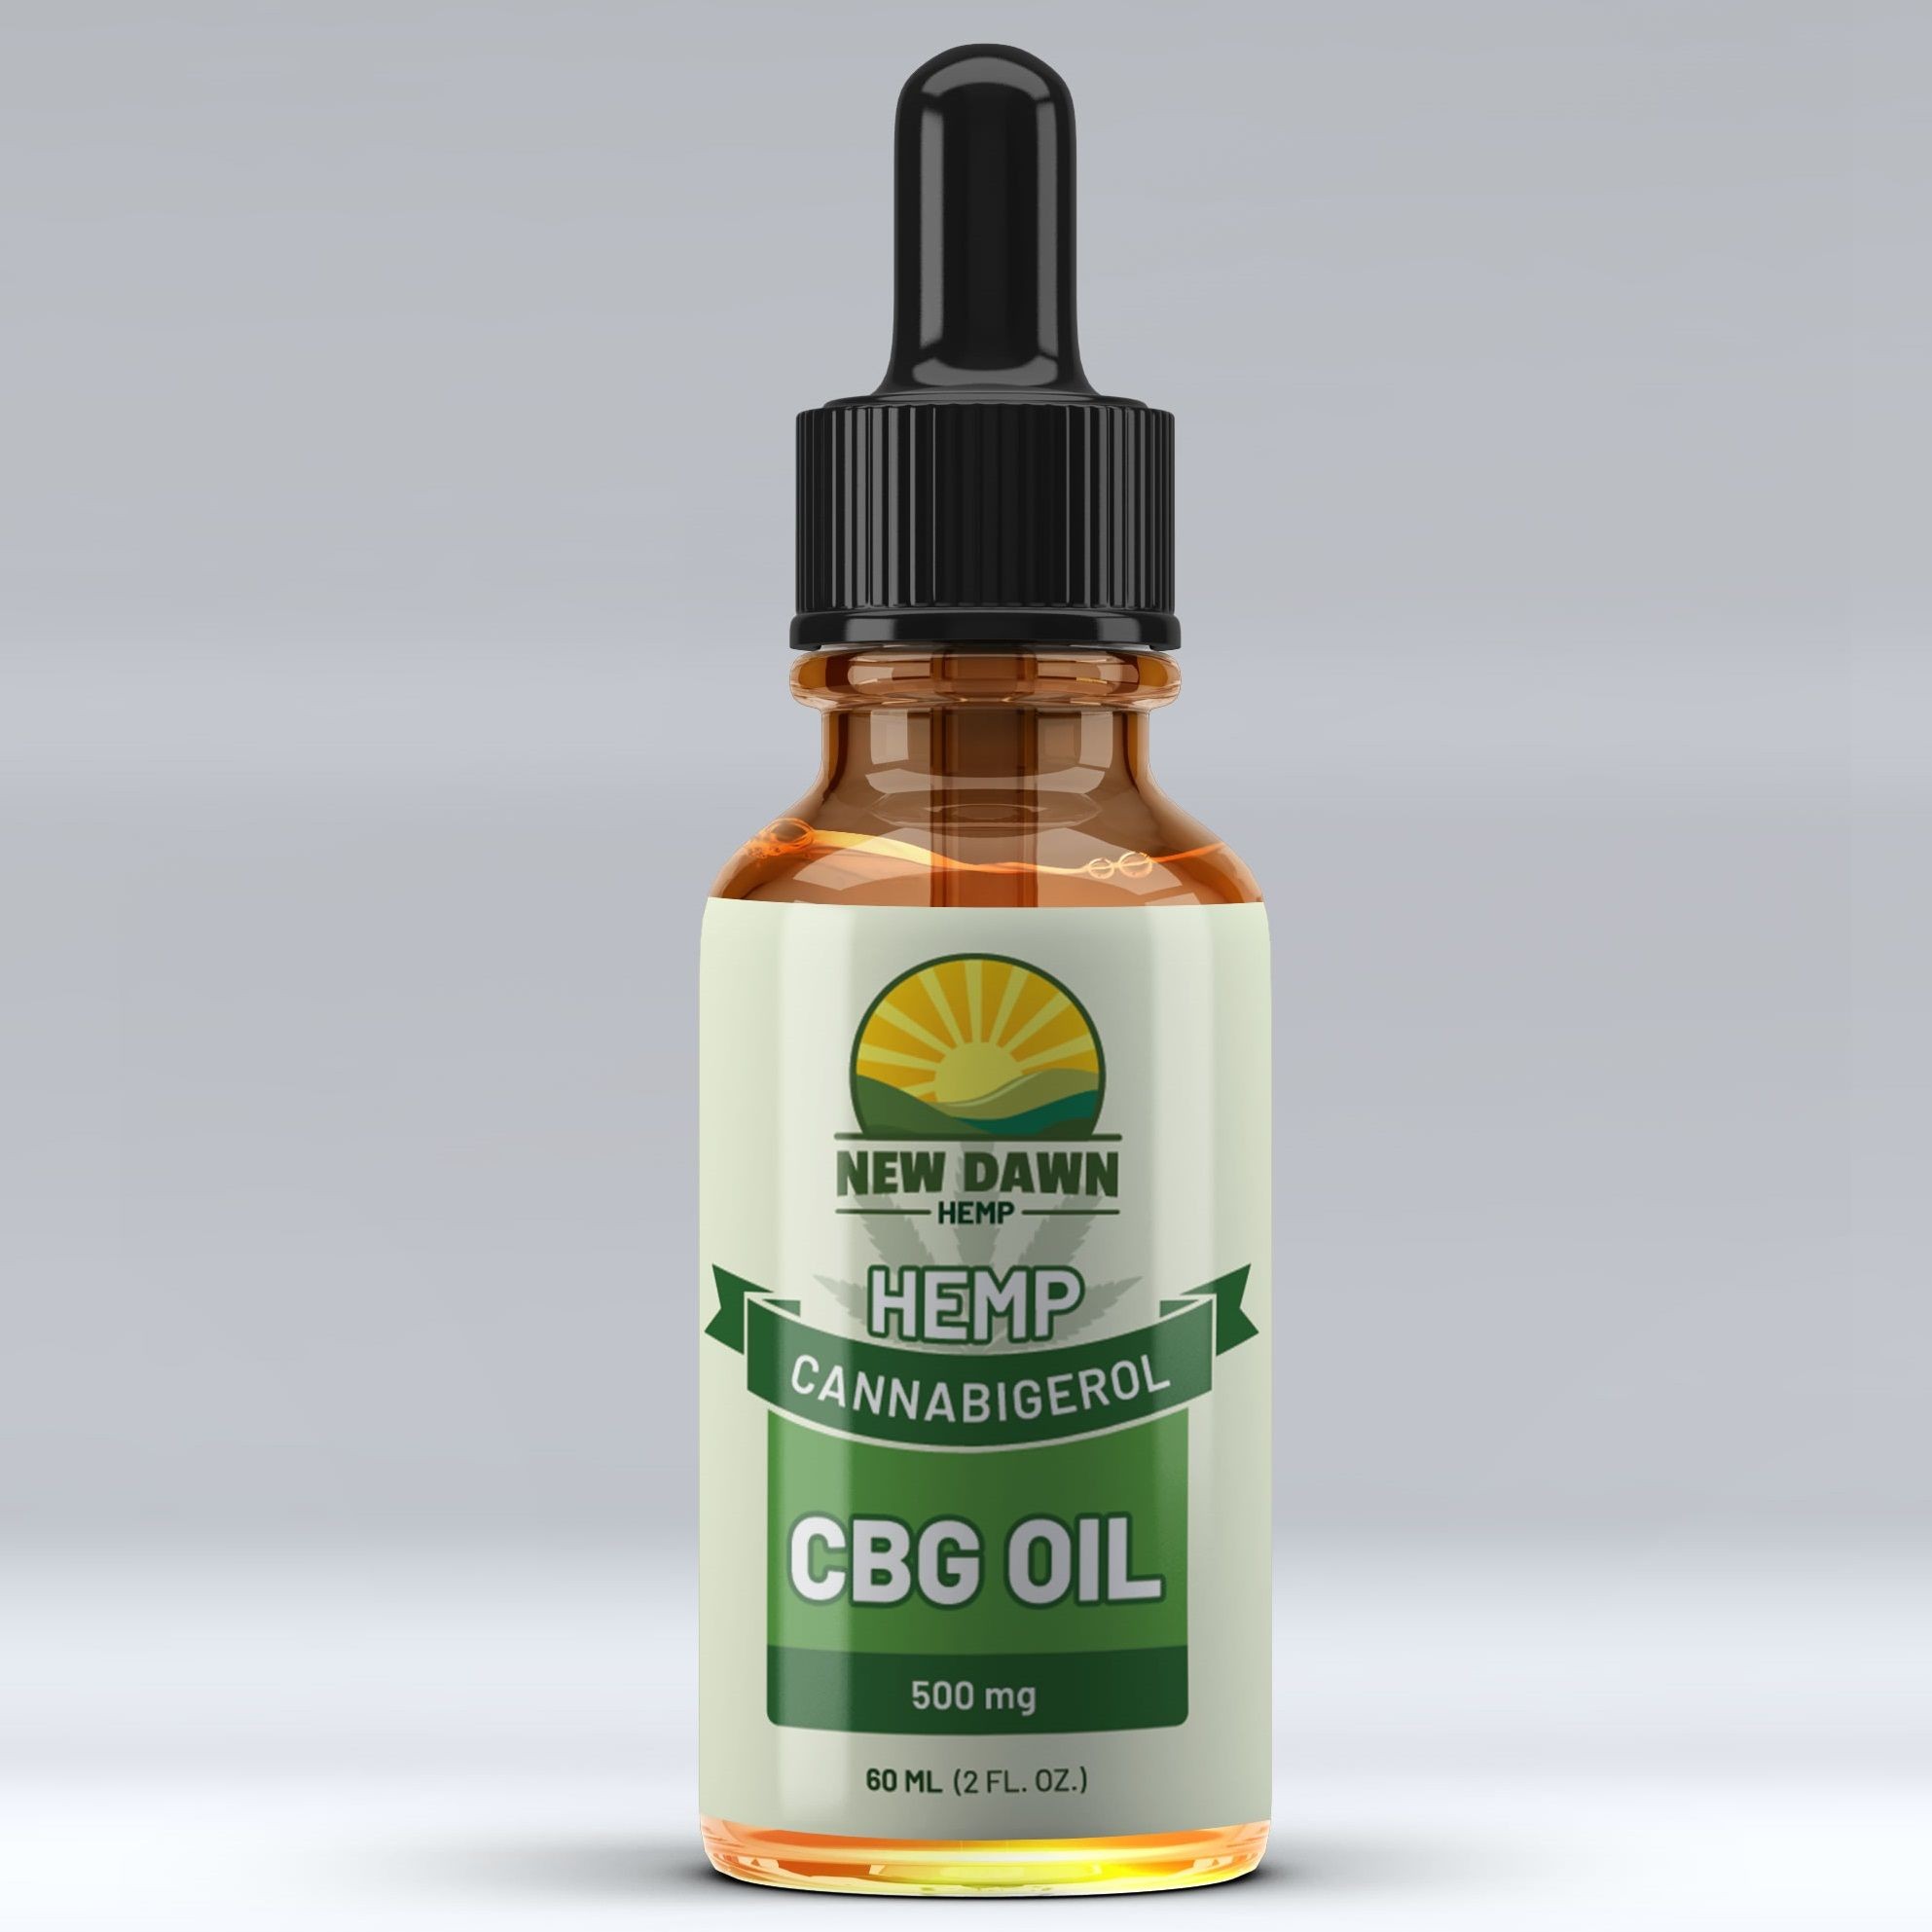 Cbg And Cbd Products - Cbg|Gummies|Cbd|Effects|Thc|Cannabinoid|Hemp|Cannabinoids|Image|Products|Courtesy|Product|Way|Benefits|Dosage|Everyone|Oil|People|Spectrum|Others|Gummy|Time|Dosages|Advantages|Cannabis|Results|Treatment|Body|Stomach|Tincture|Pain|Drug|Approach|Isolate|Side|Dog|Ingredients|List|State|Cannabigerol|Cbg Gummies|Psychoactive Effects|Full Spectrum Gummies|Image Courtesy|Full-Spectrum Cbd Products|Different Dosages|Right Dosage|Empty Stomach|Cbd Gummies|Cbd Isolate|Side Effects|Different Effects|Dog Cbg Gummies|Drug Test|Full-Spectrum Cbd Product|Few Things|Chronic Pain|Full-Spectrum Cbd|Psychotropic Effects|Final Thoughts|Right Dosage Everyone|Final Tips|Same Results|Cbg Ratio|Appetite Loss|Powerful Hunger Stimulant|Whereas Cbd|Thc Ratio Gummies|Dangerous Consequence|Numerous Diseases